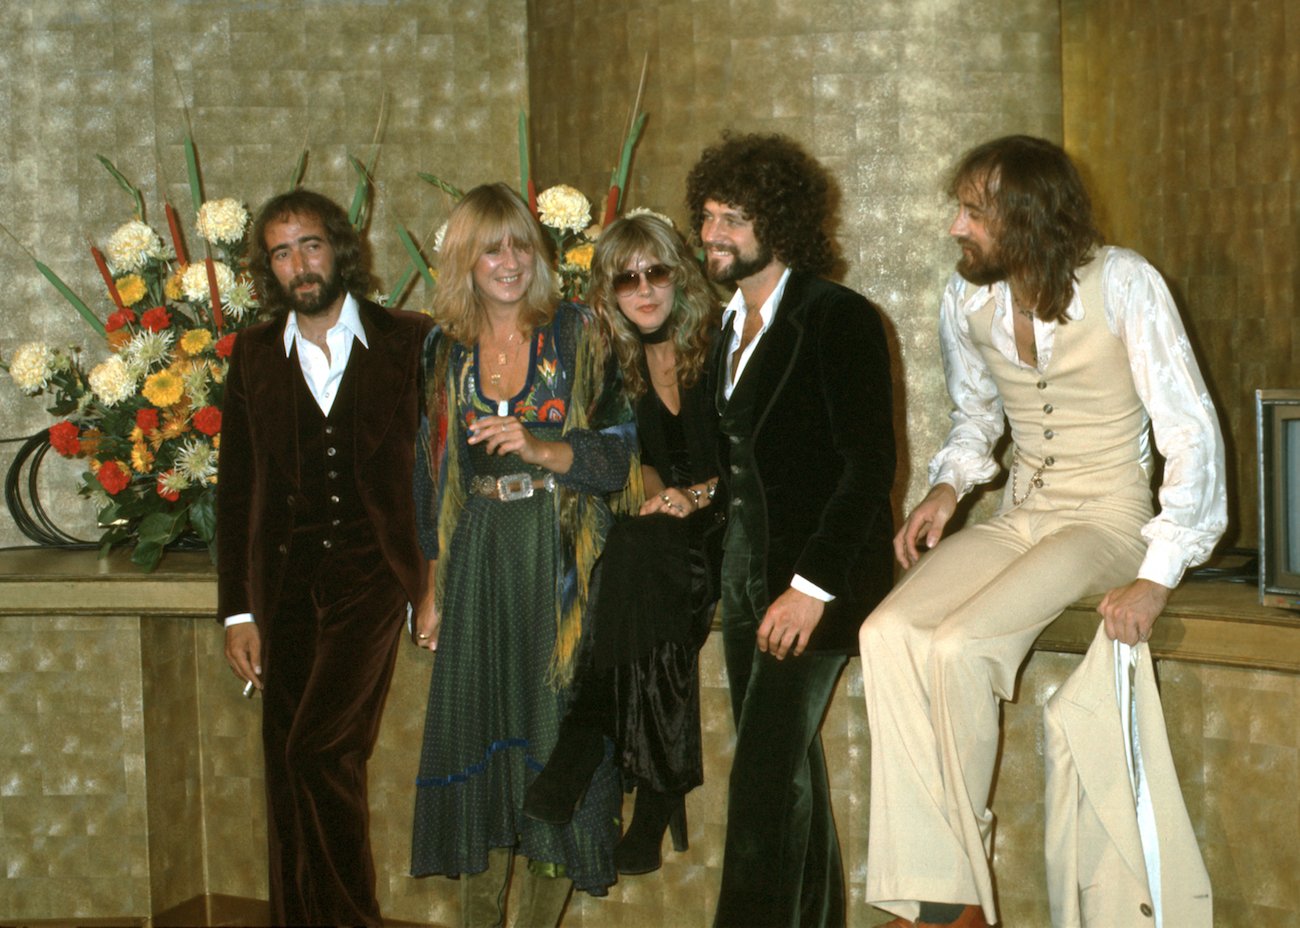 Fleetwood Mac hanging out at an event in 1977.